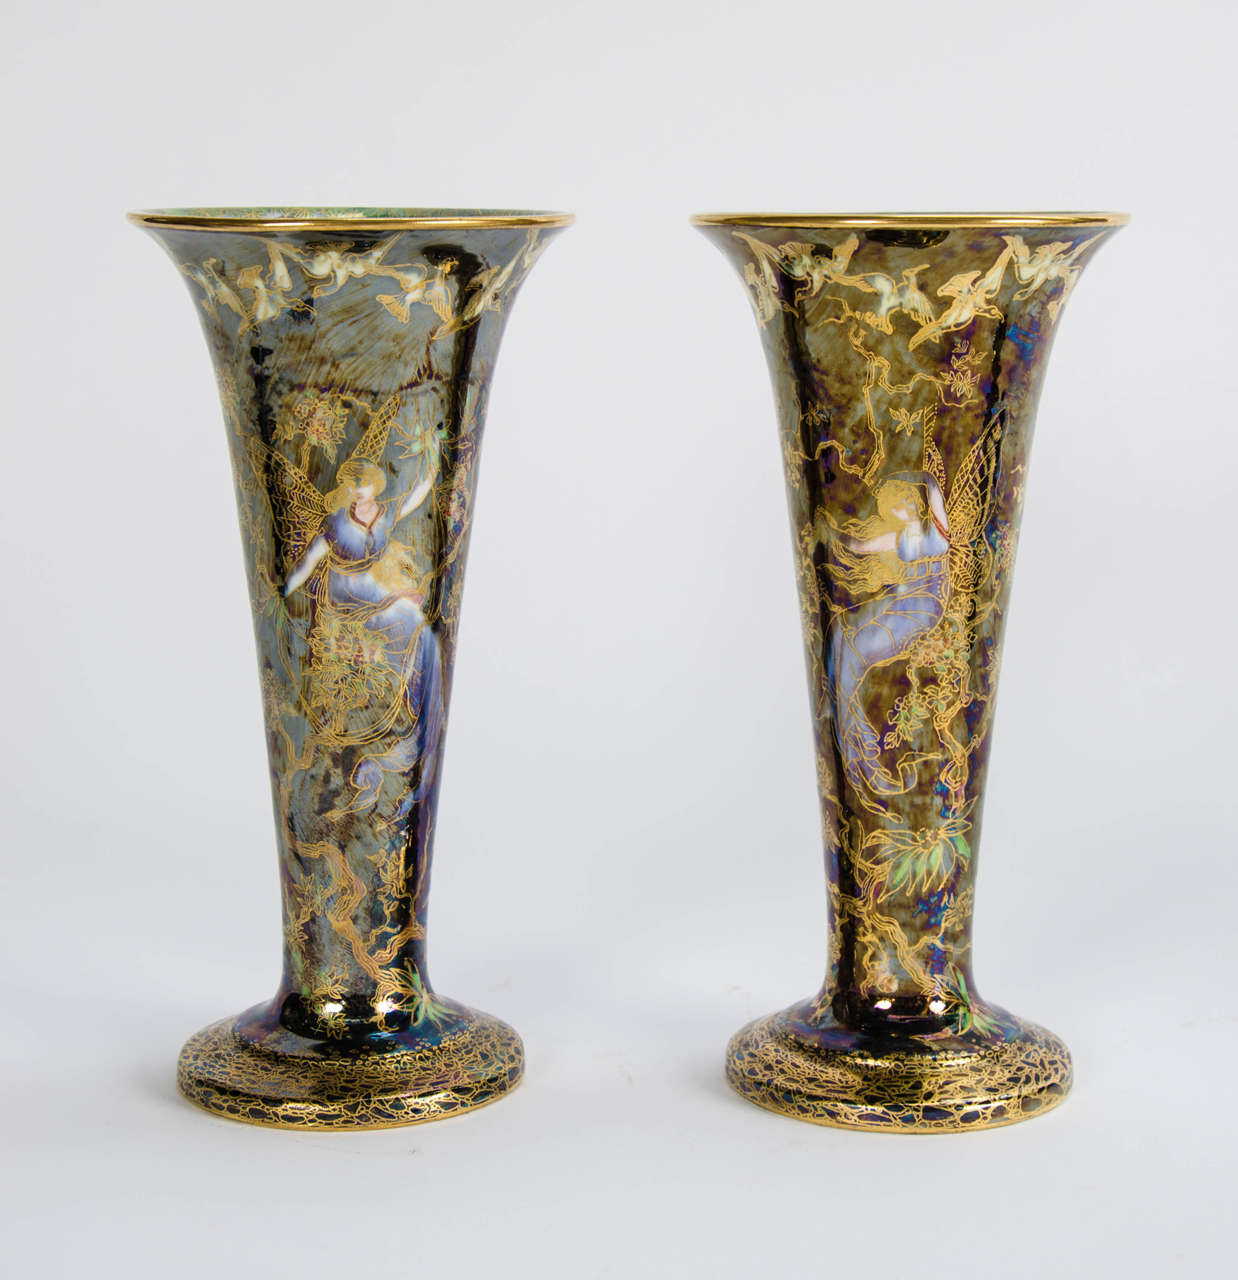 A rare pair of Wedgwood Fairyland Lustre vases.

The fairyland lustre design was created by Daisy Makeig-Jones. She started her career at Wedgwood in 1909. Between 1916 and 1941 she was chiefly responsible for the creation and Expansion of the